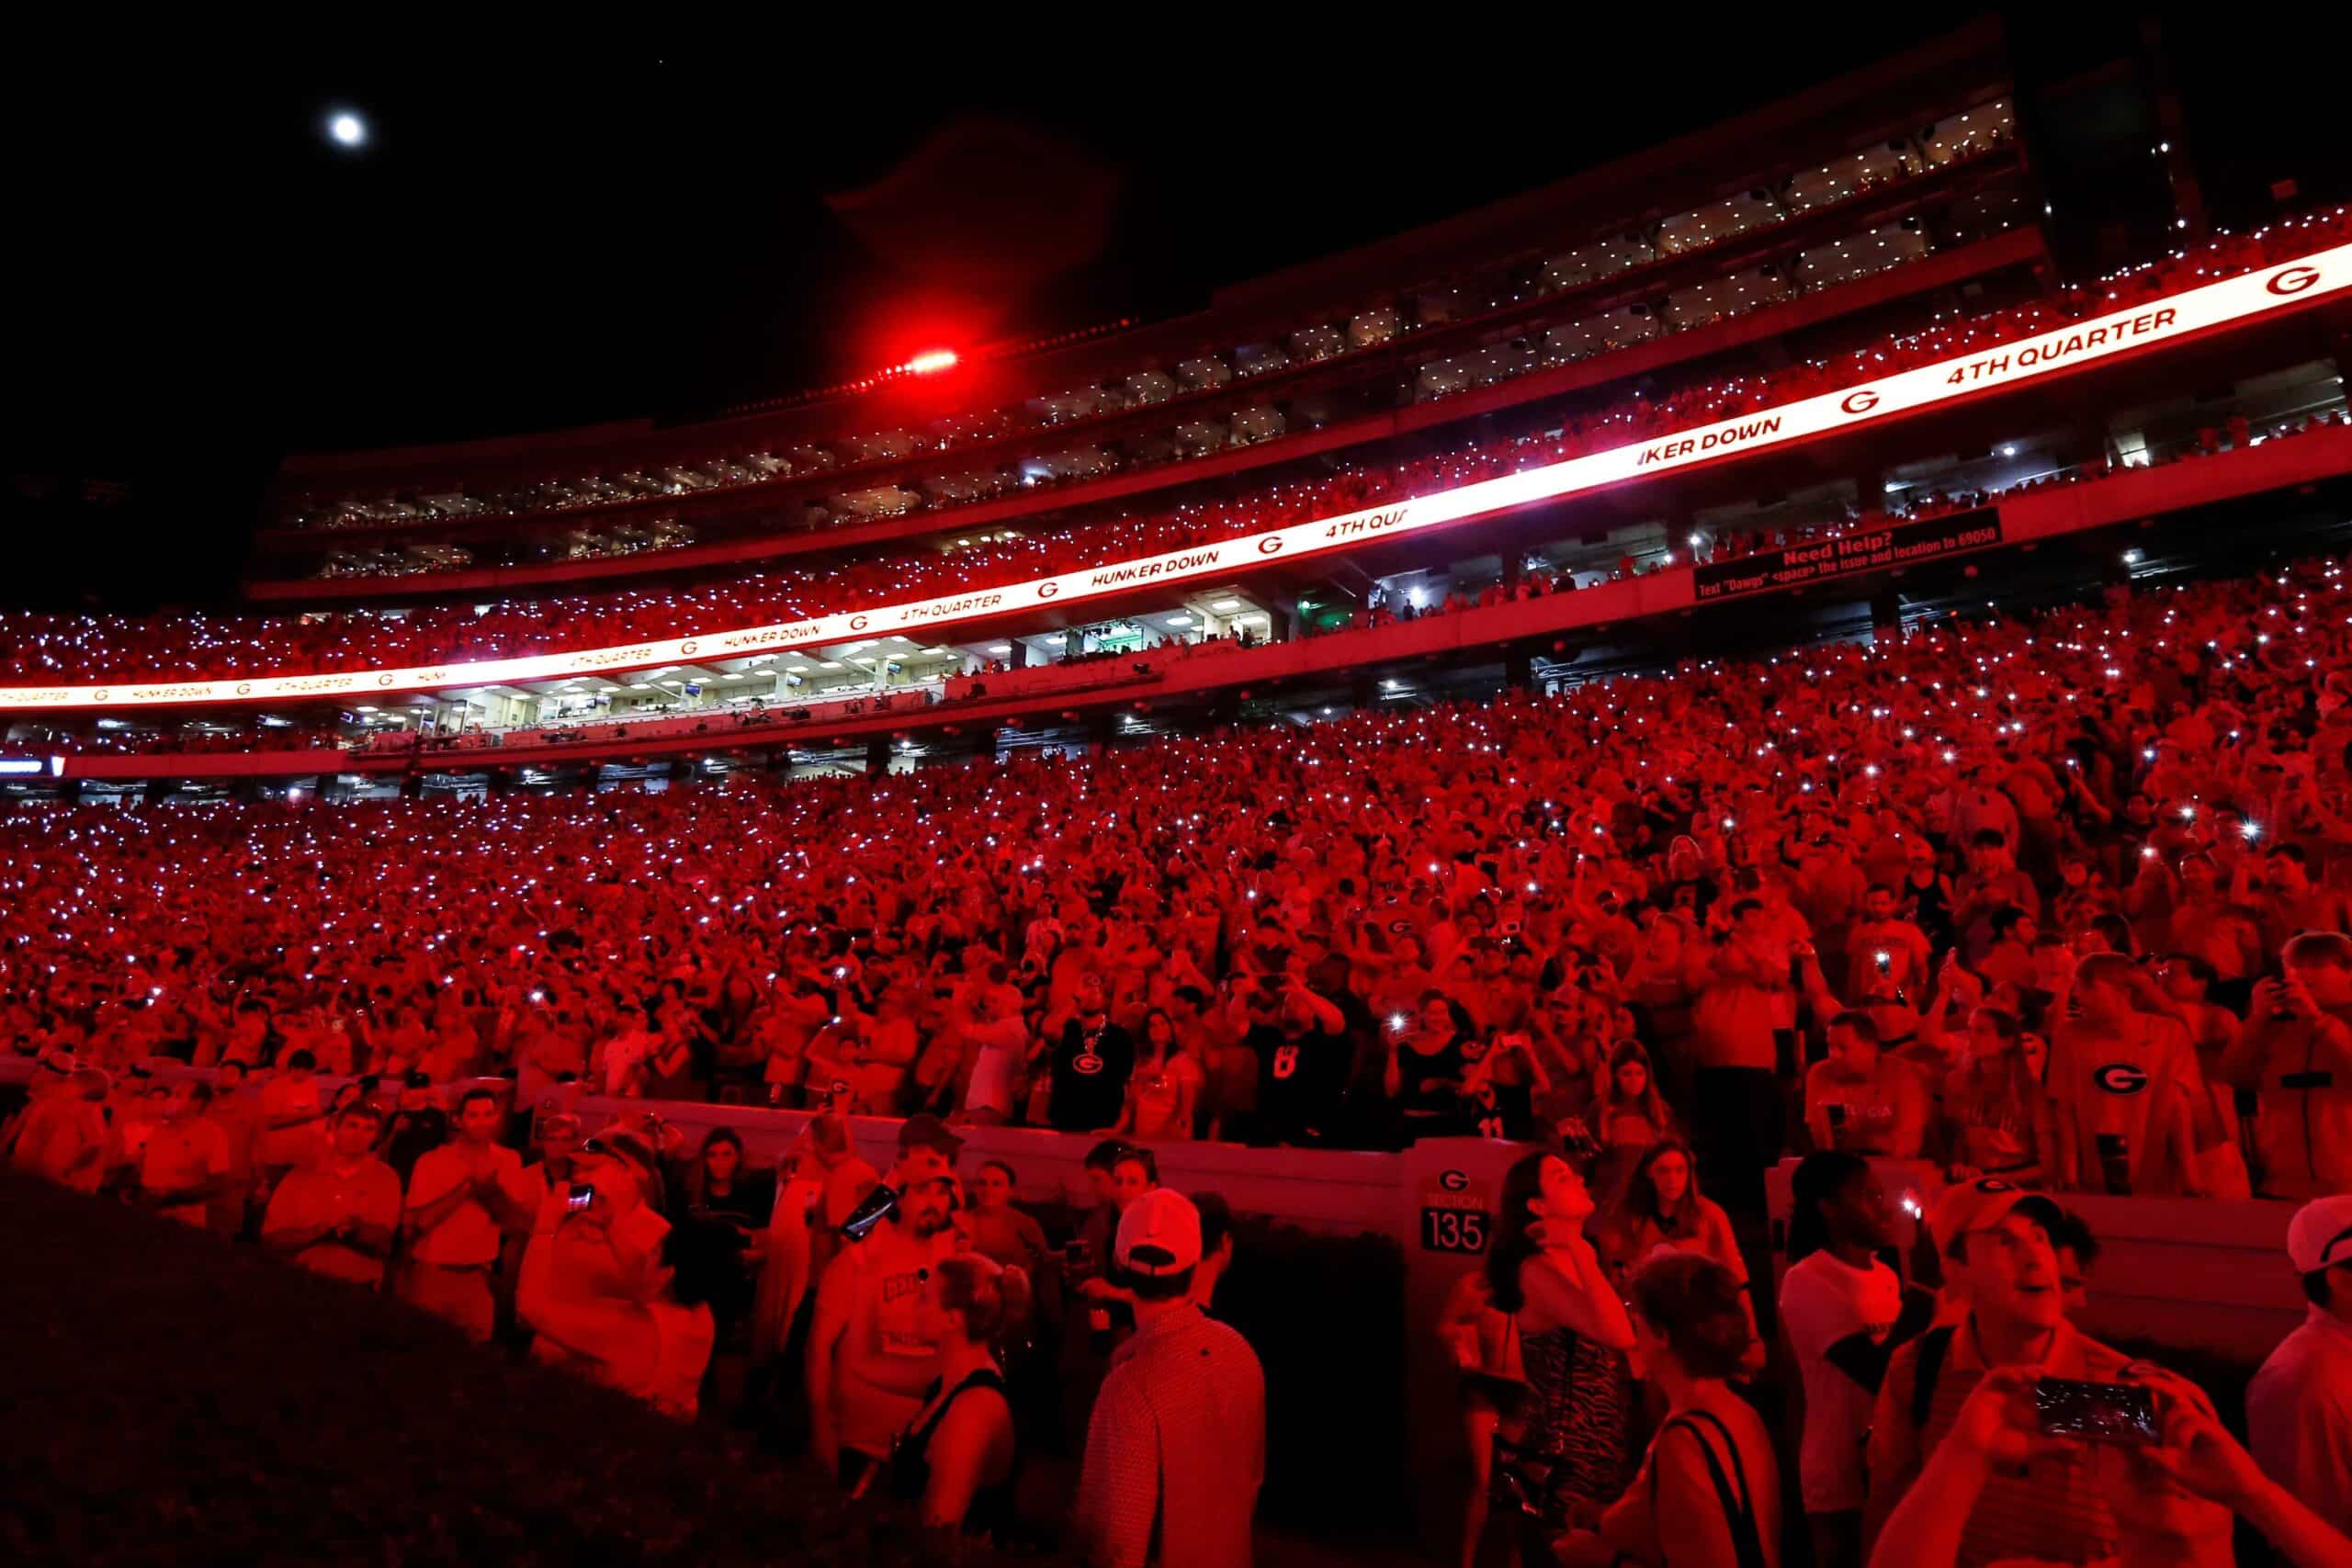 Sanford Stadium is lit up red at the start of the fourth quarter during an NCAA college football game between South Carolina and Georgia in Athens, Ga., on Sept. 18, 2021. Georgia won 40-13.